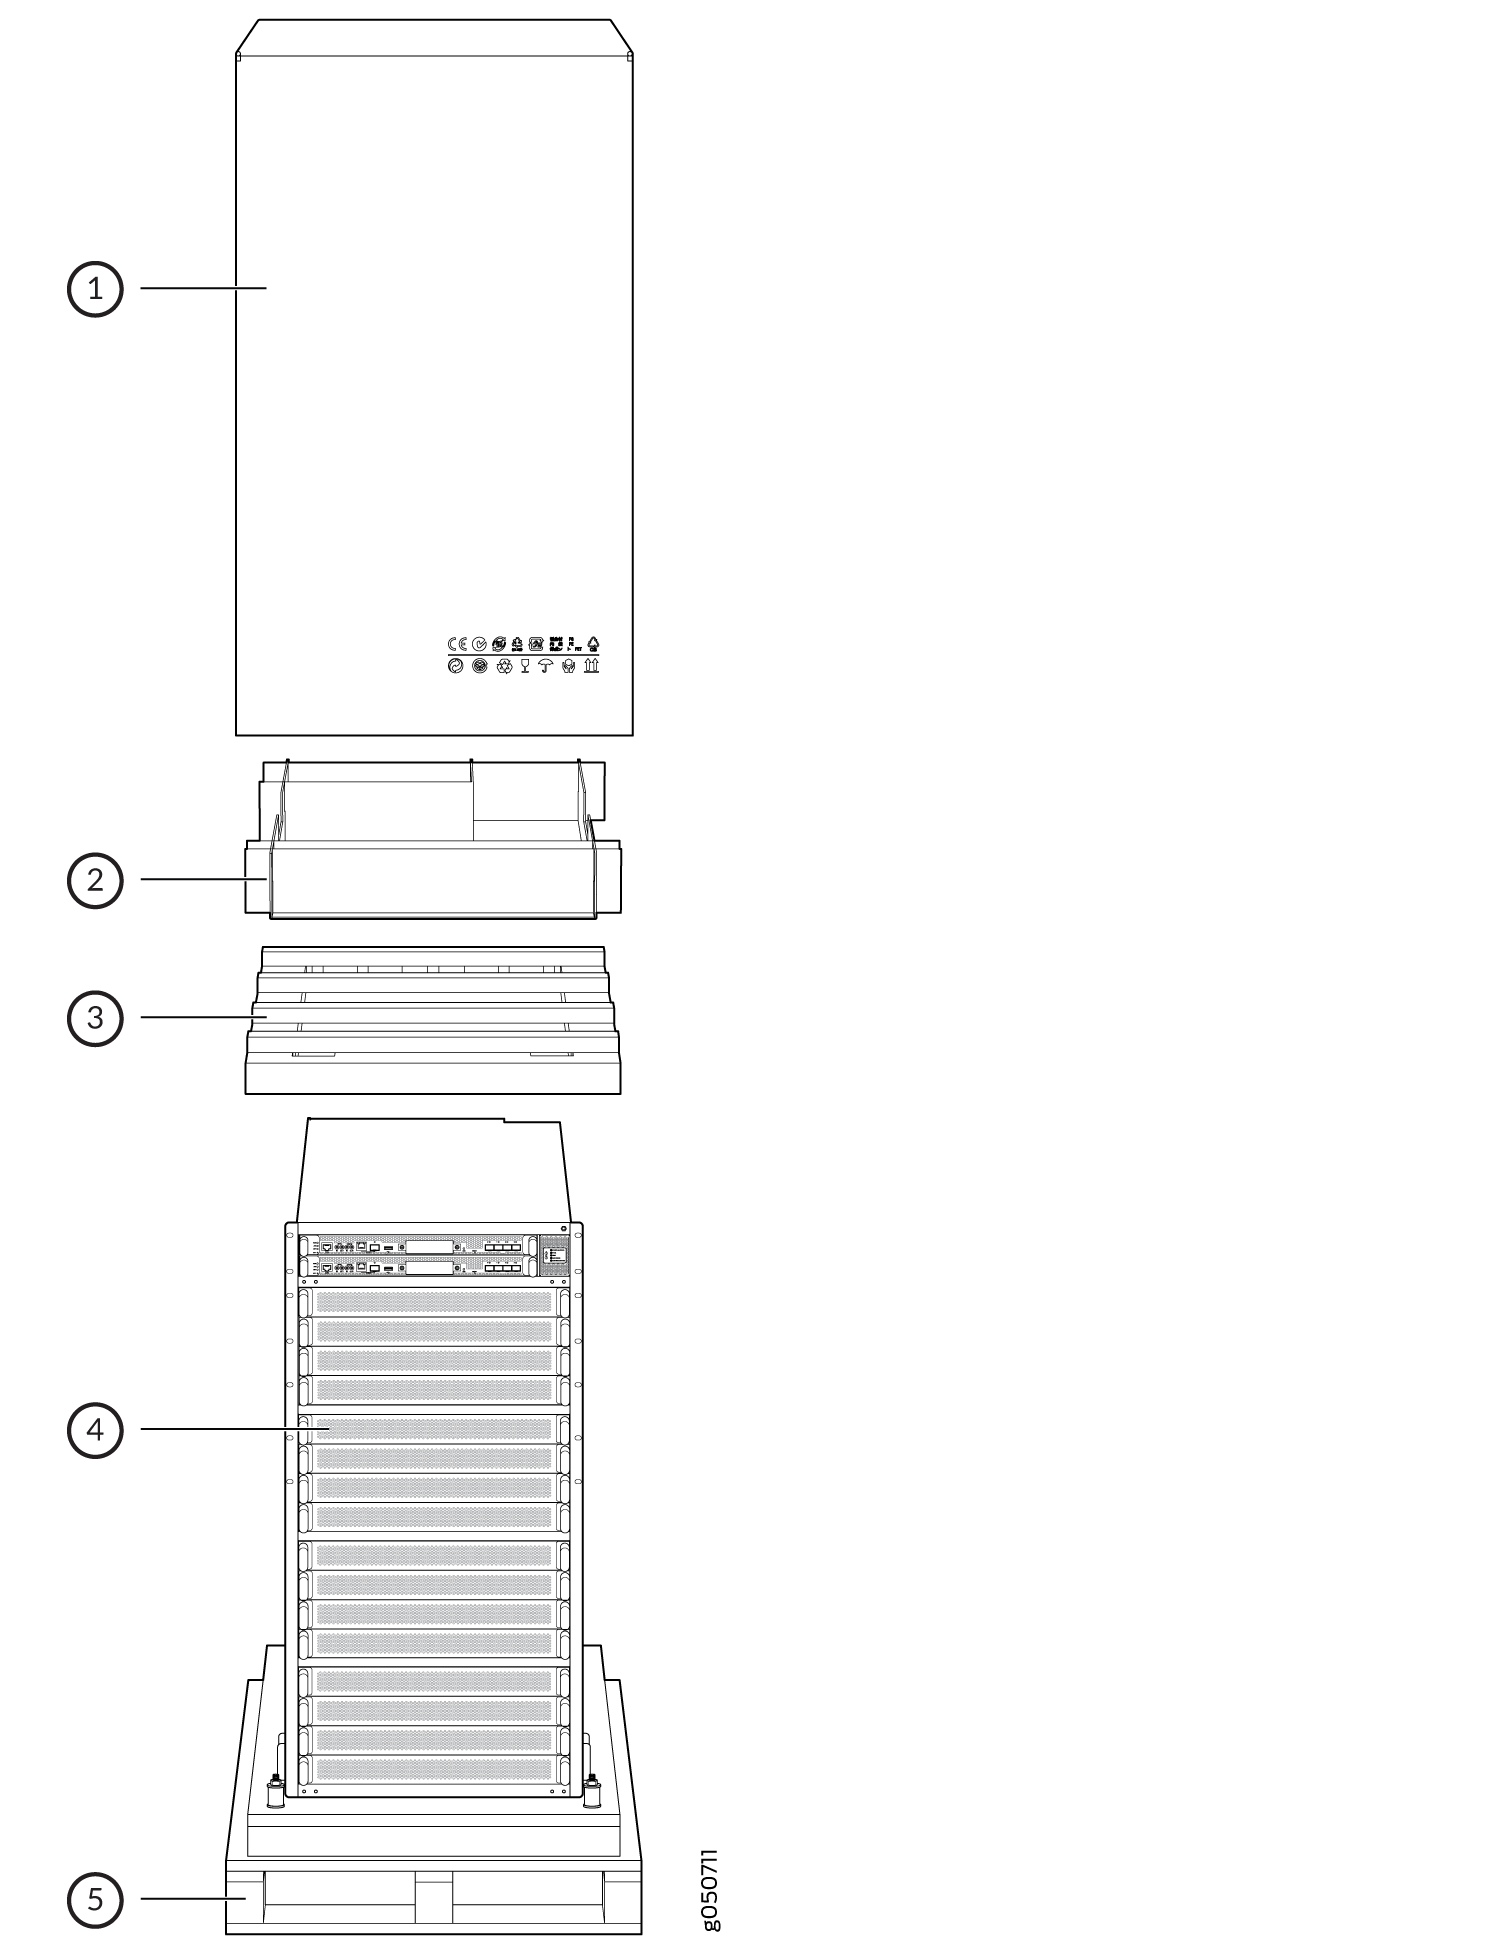 Configuration for Packing the PTX10016 Chassis